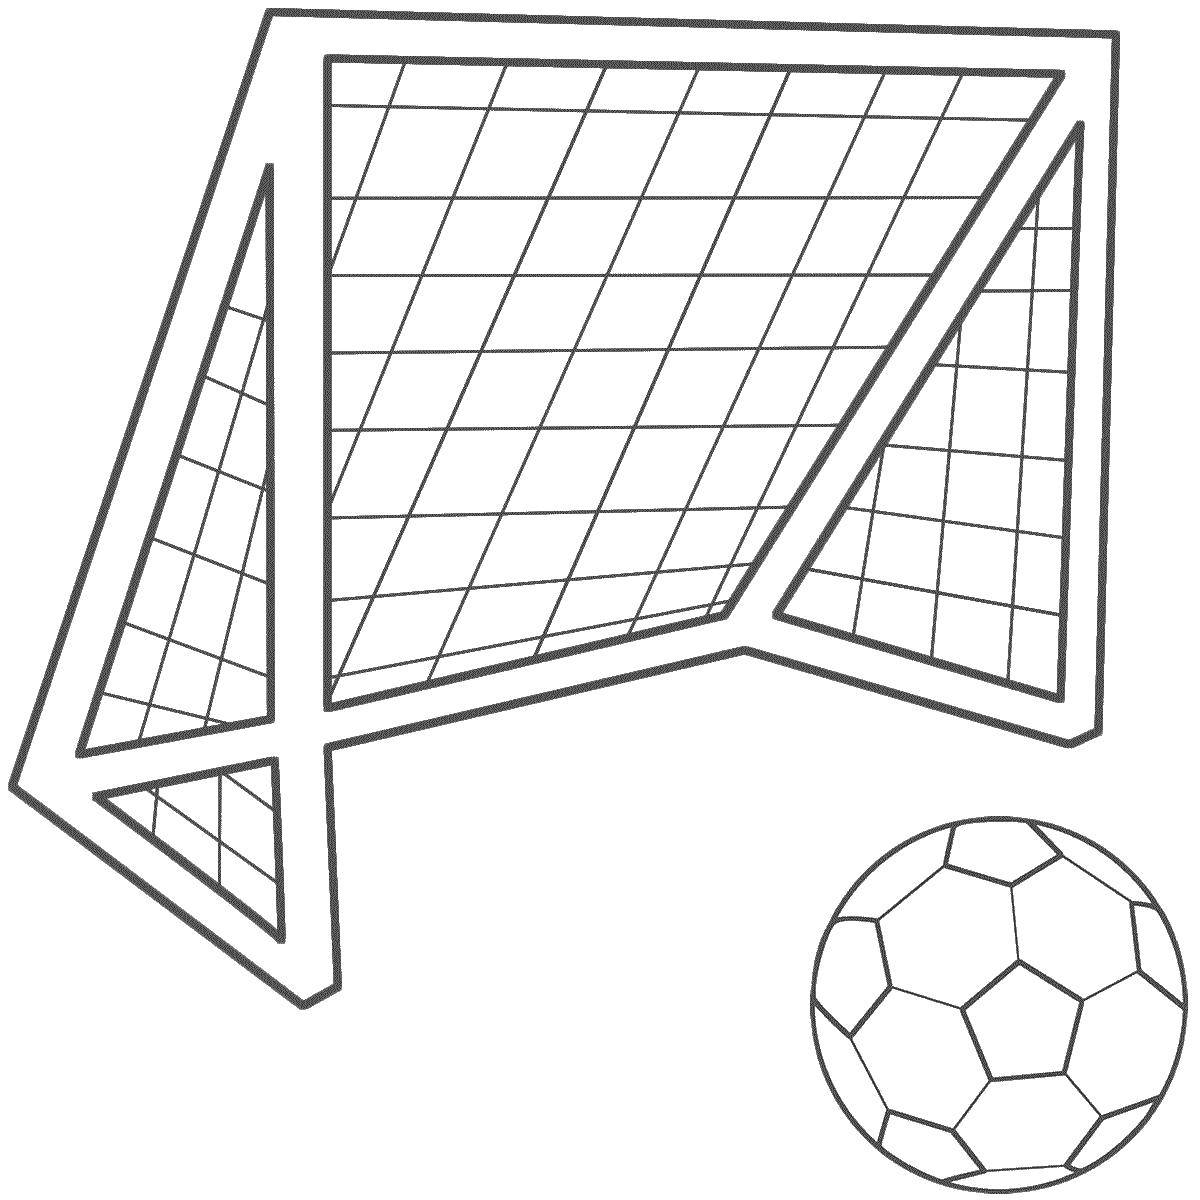 Coloring Soccer ball and gate. Category Sports. Tags:  Sports, soccer, ball, game.